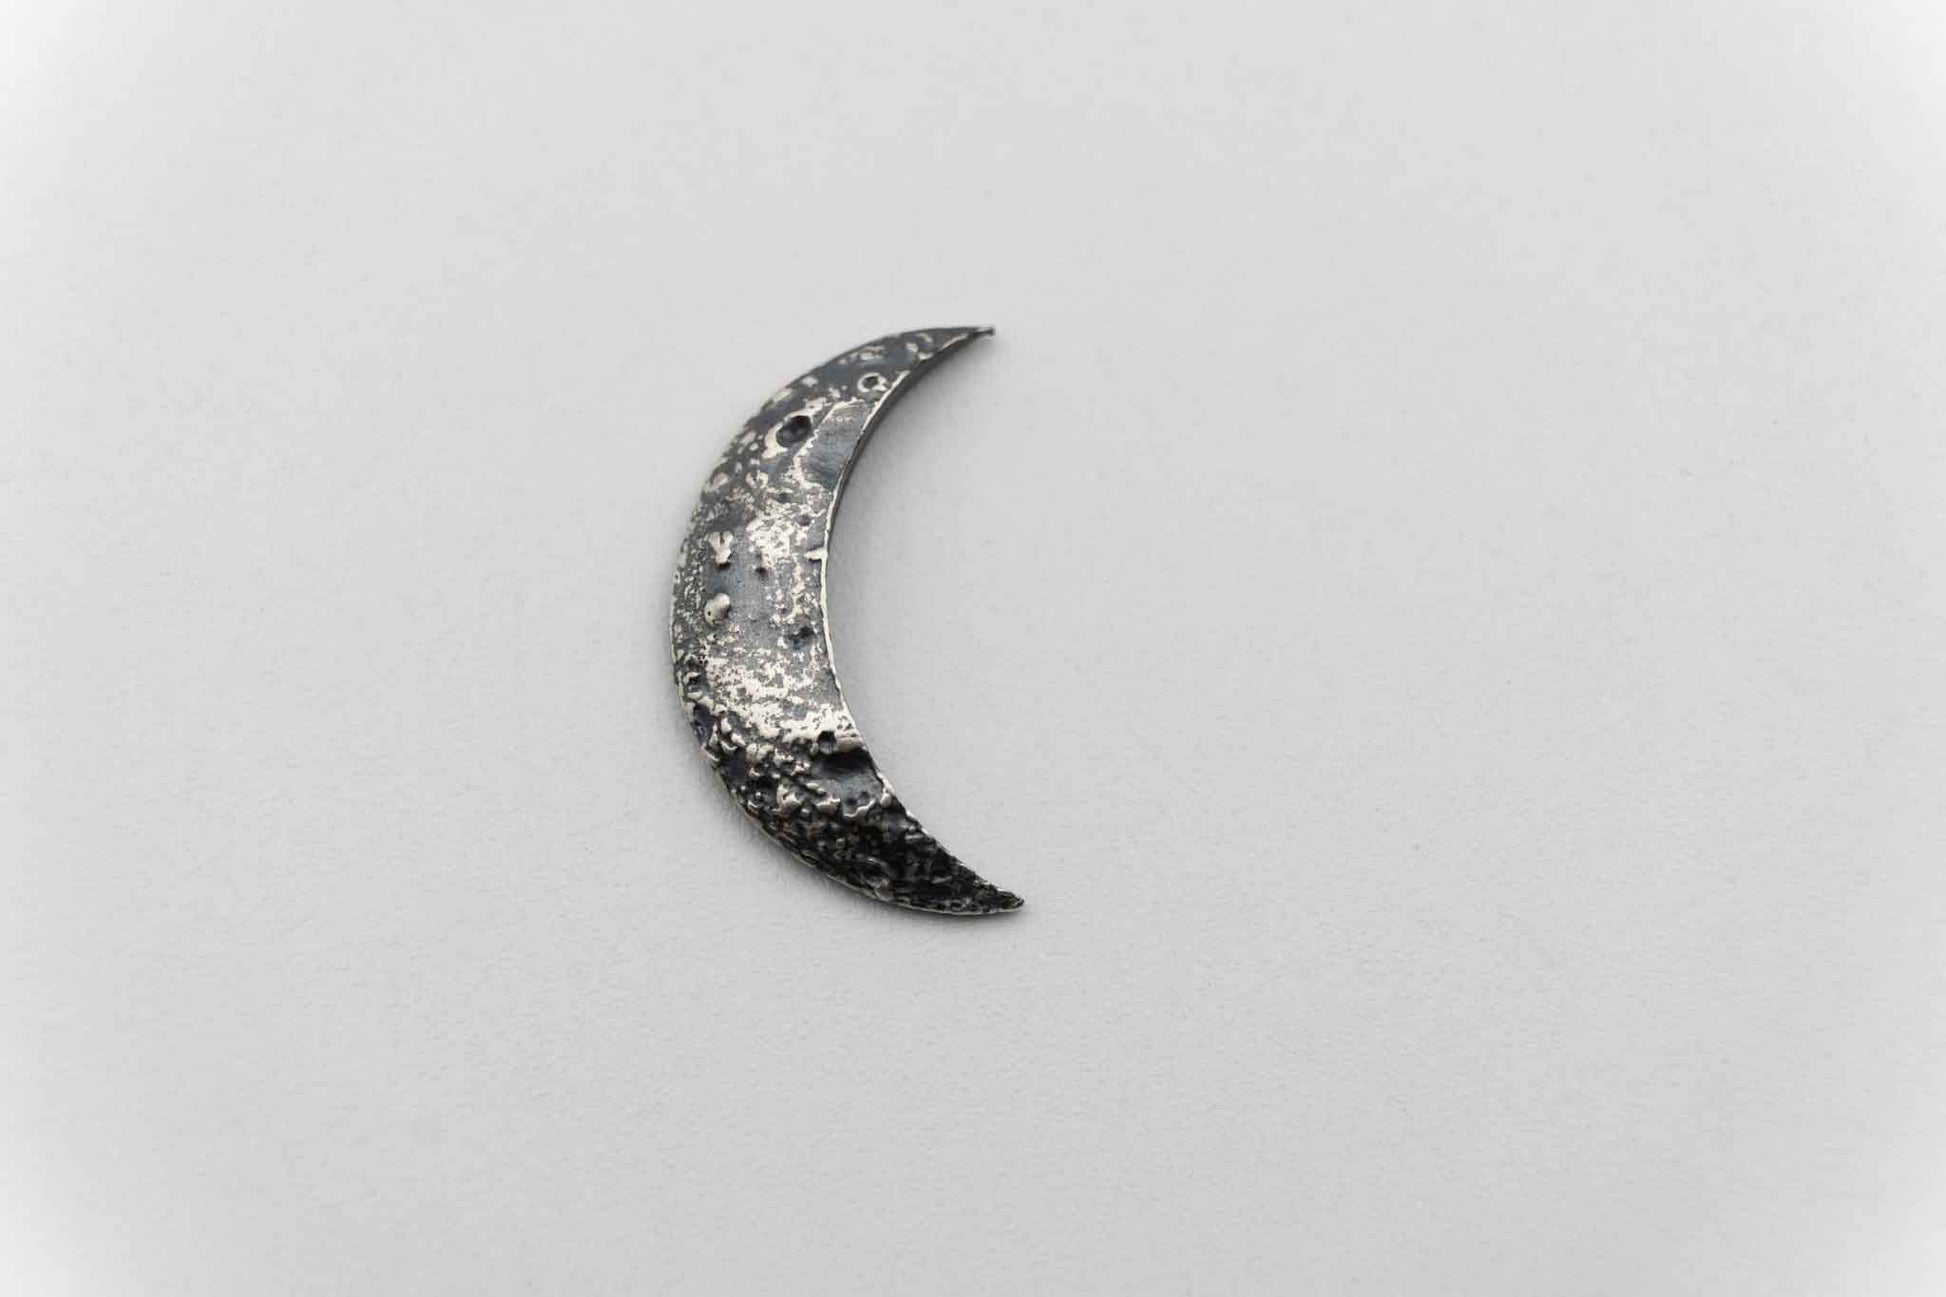 Waning Crescent Lunar Moon Phase Casting